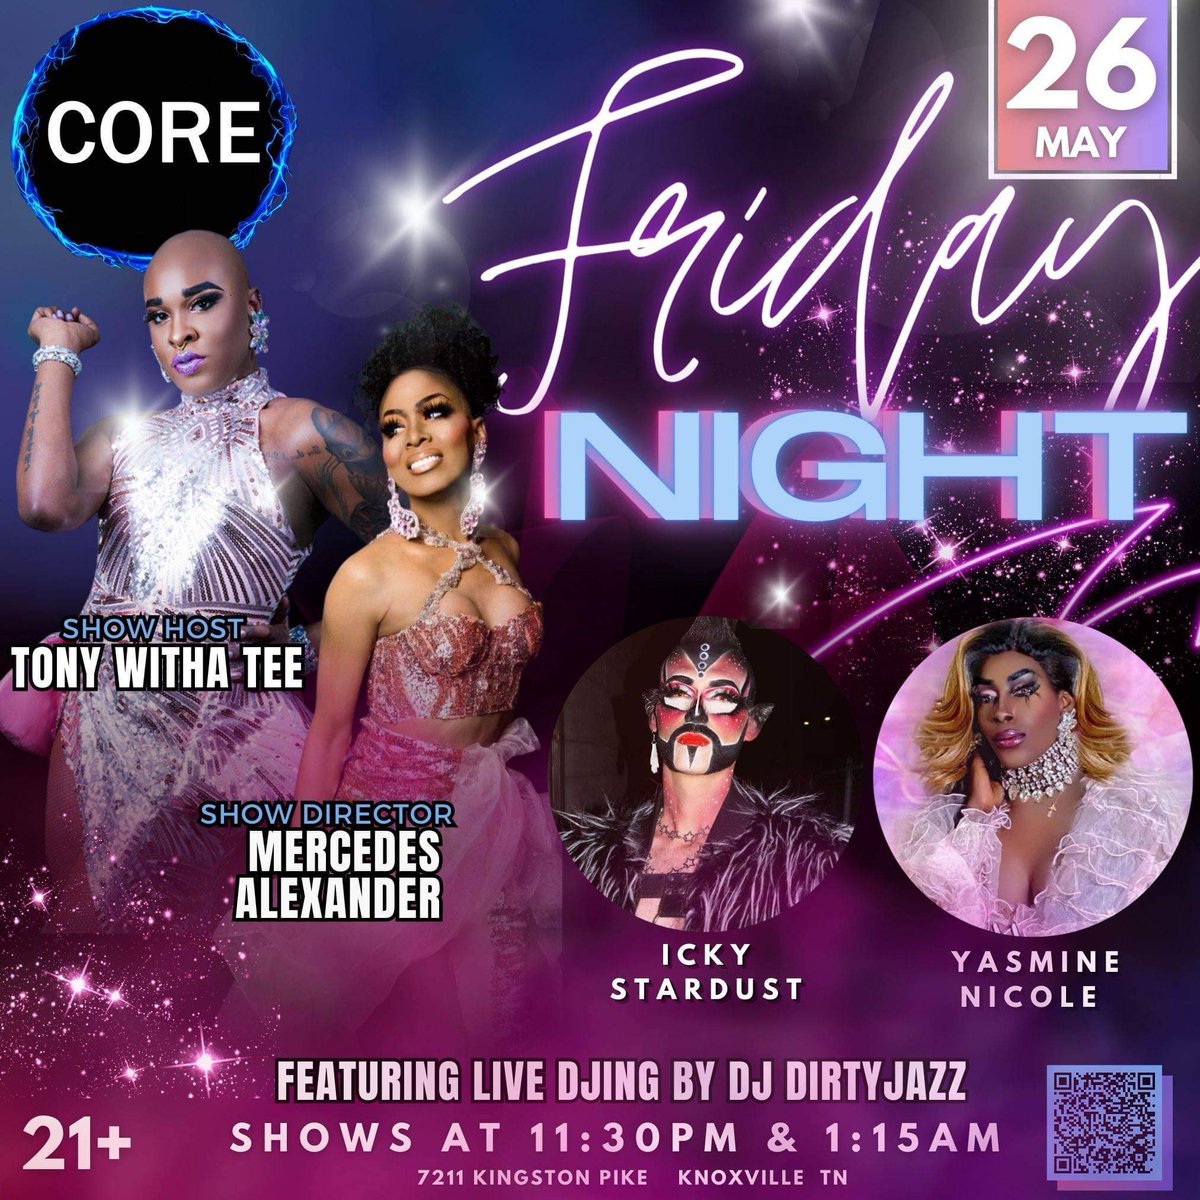 Tomorrow night at CORE! Join me and these other fabulous entertainers. #THEmercedesalexander #Knoxvilletn  #dragshow #dragisnotacrime